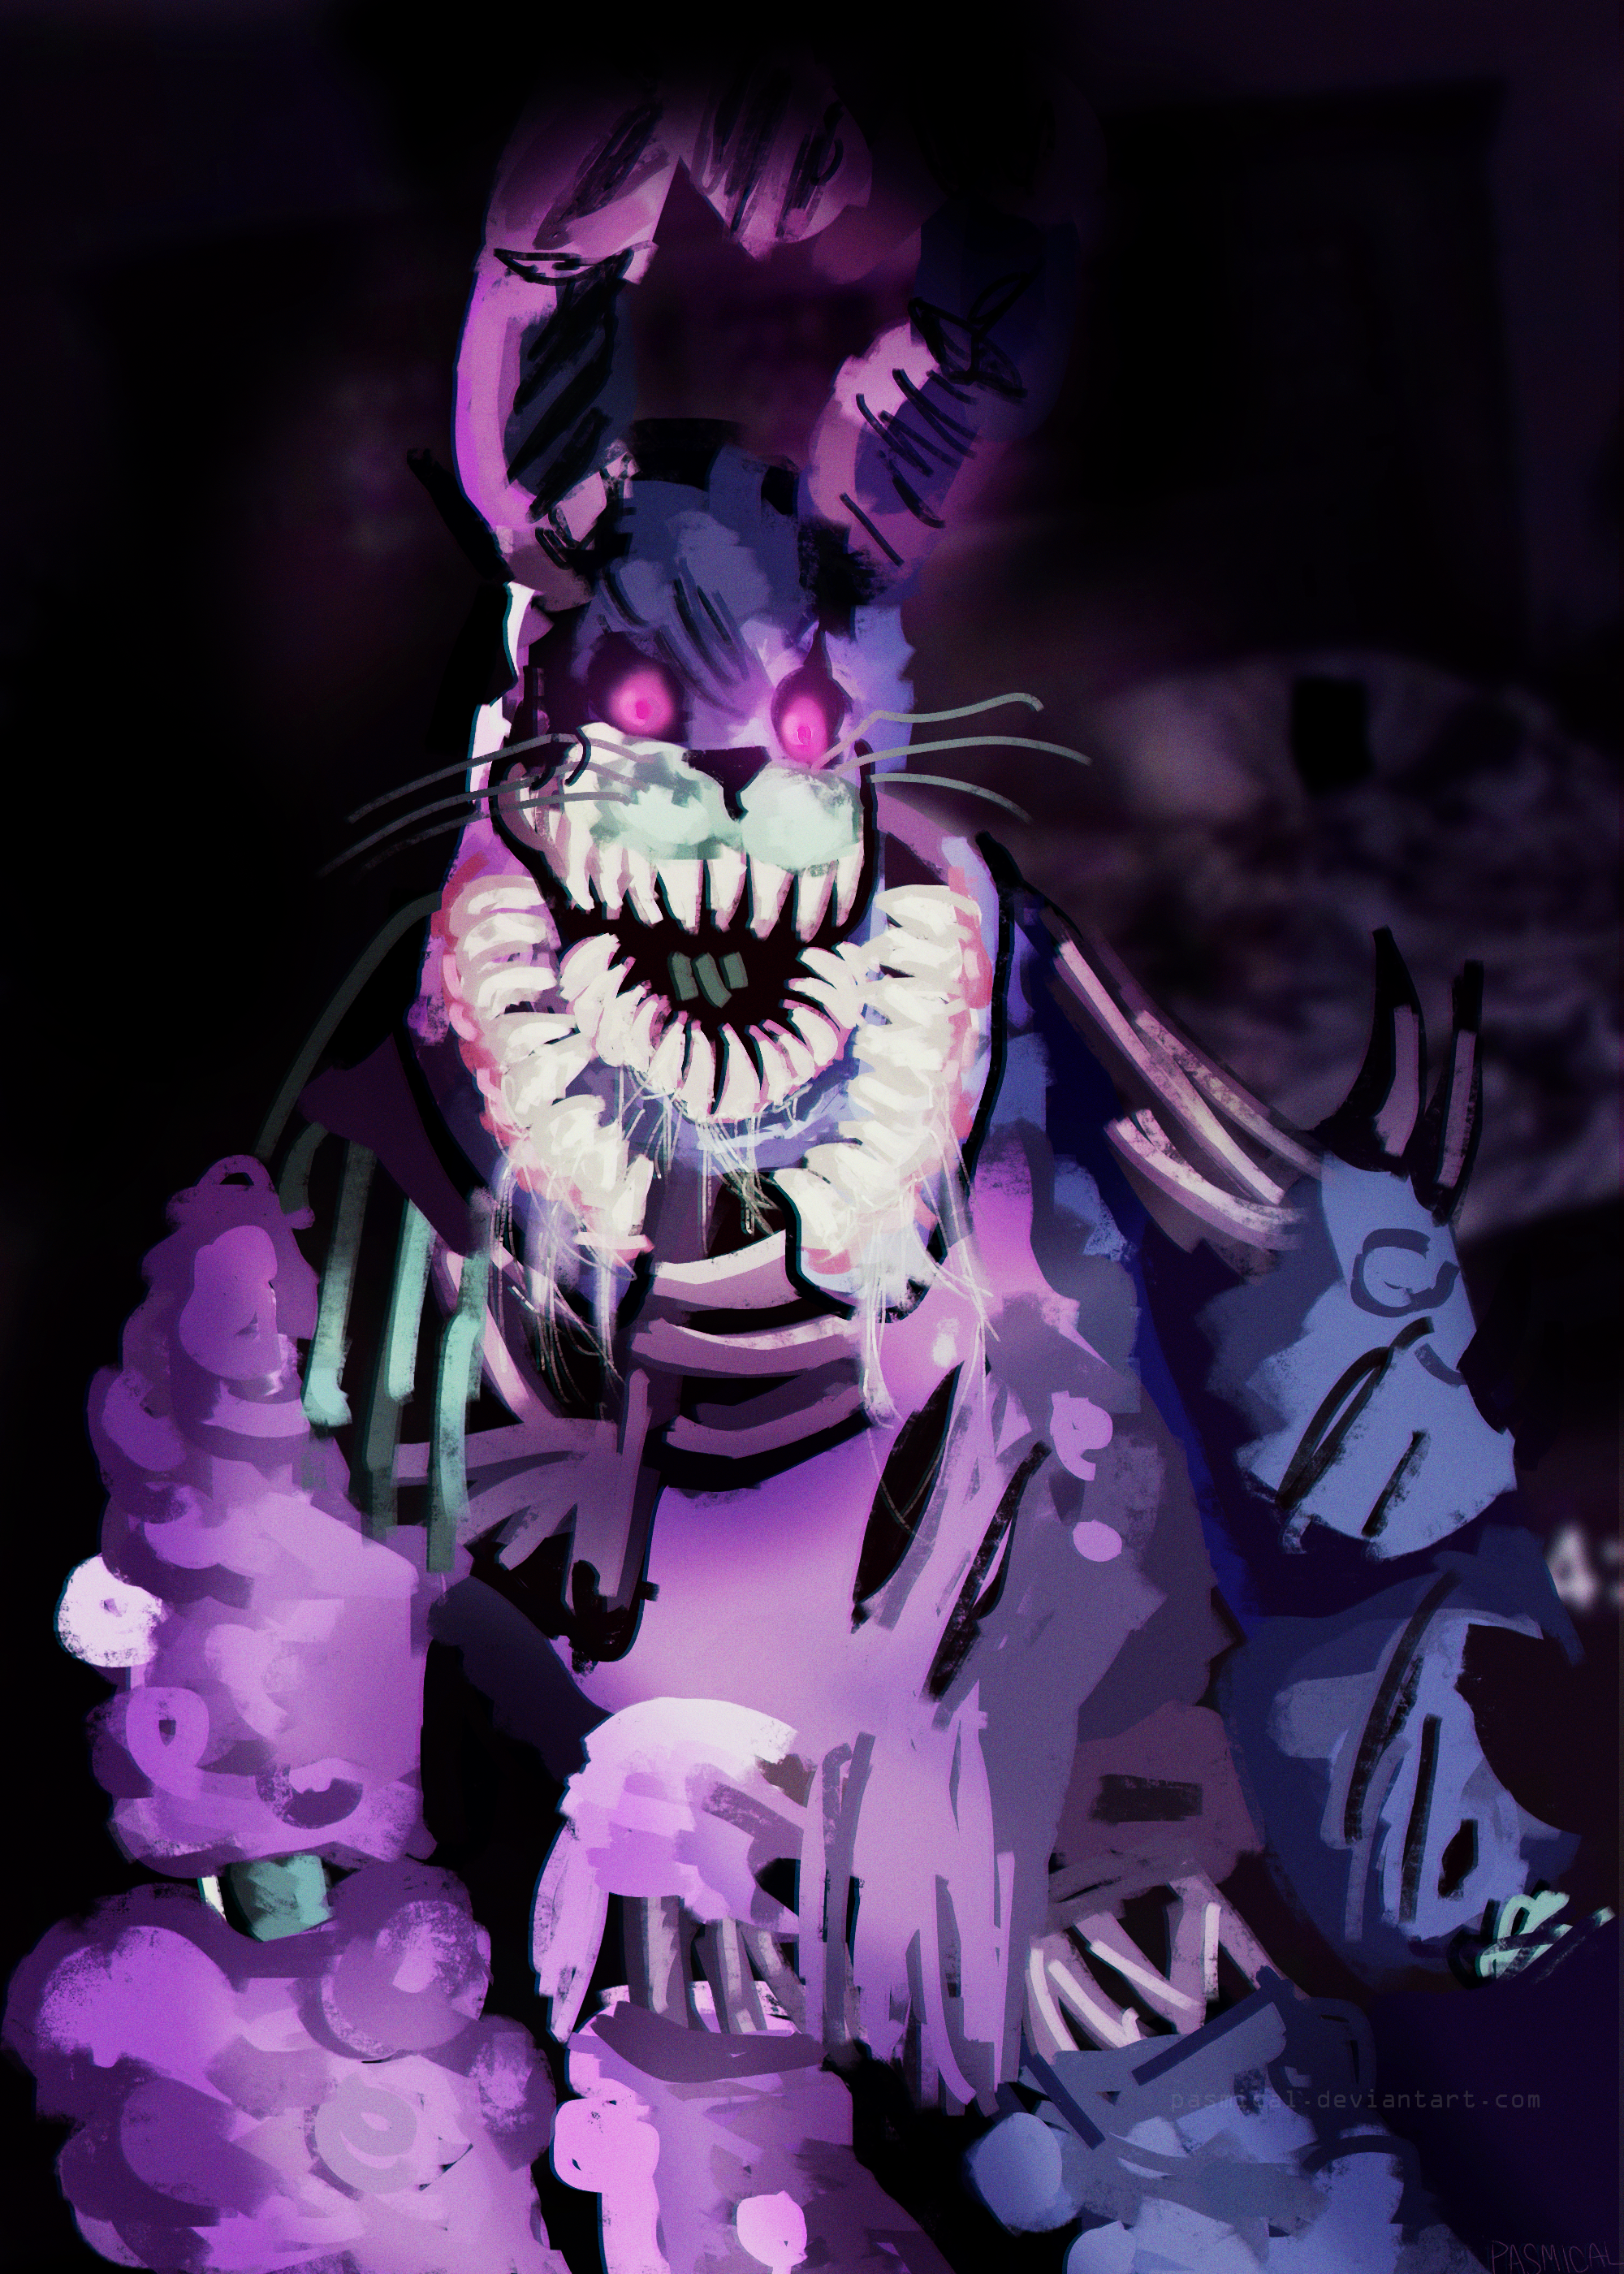 Here you will find pictures of Bonnie, Toy Bonnie, Withered Bonnie, Nightma...